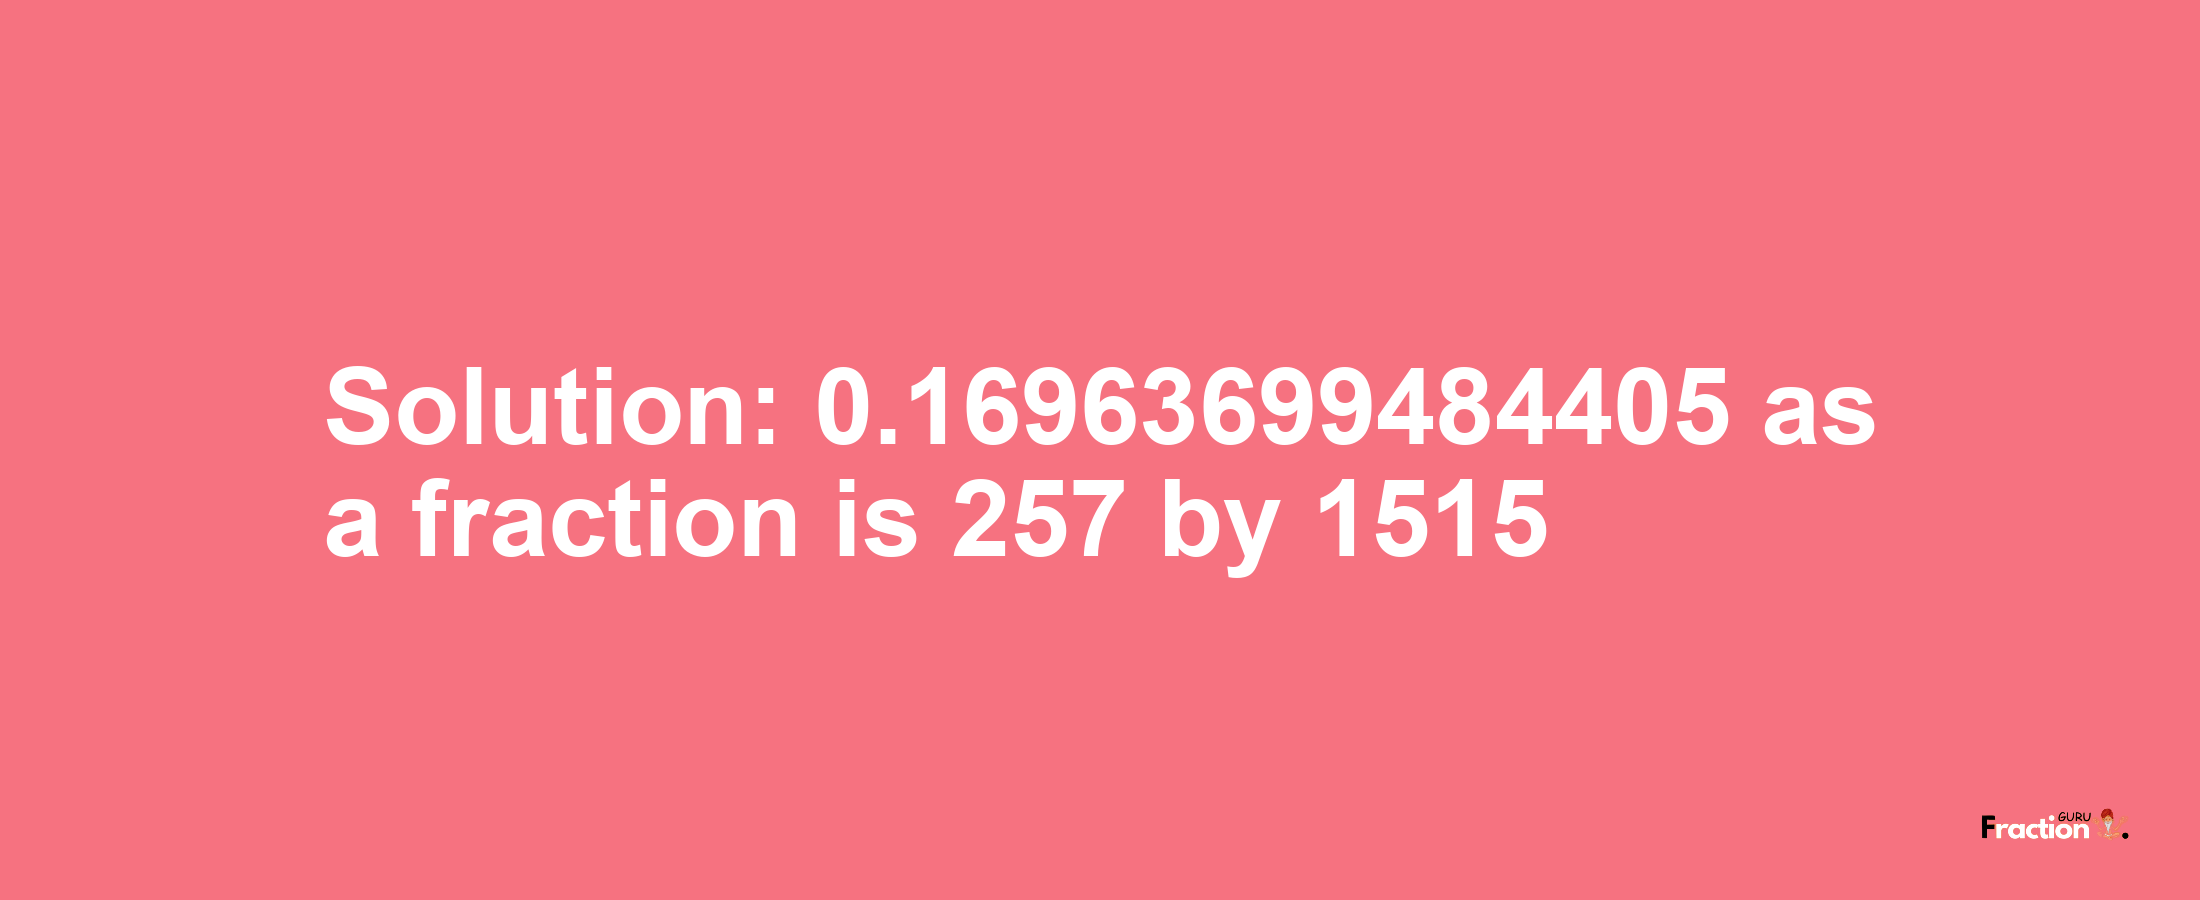 Solution:0.16963699484405 as a fraction is 257/1515